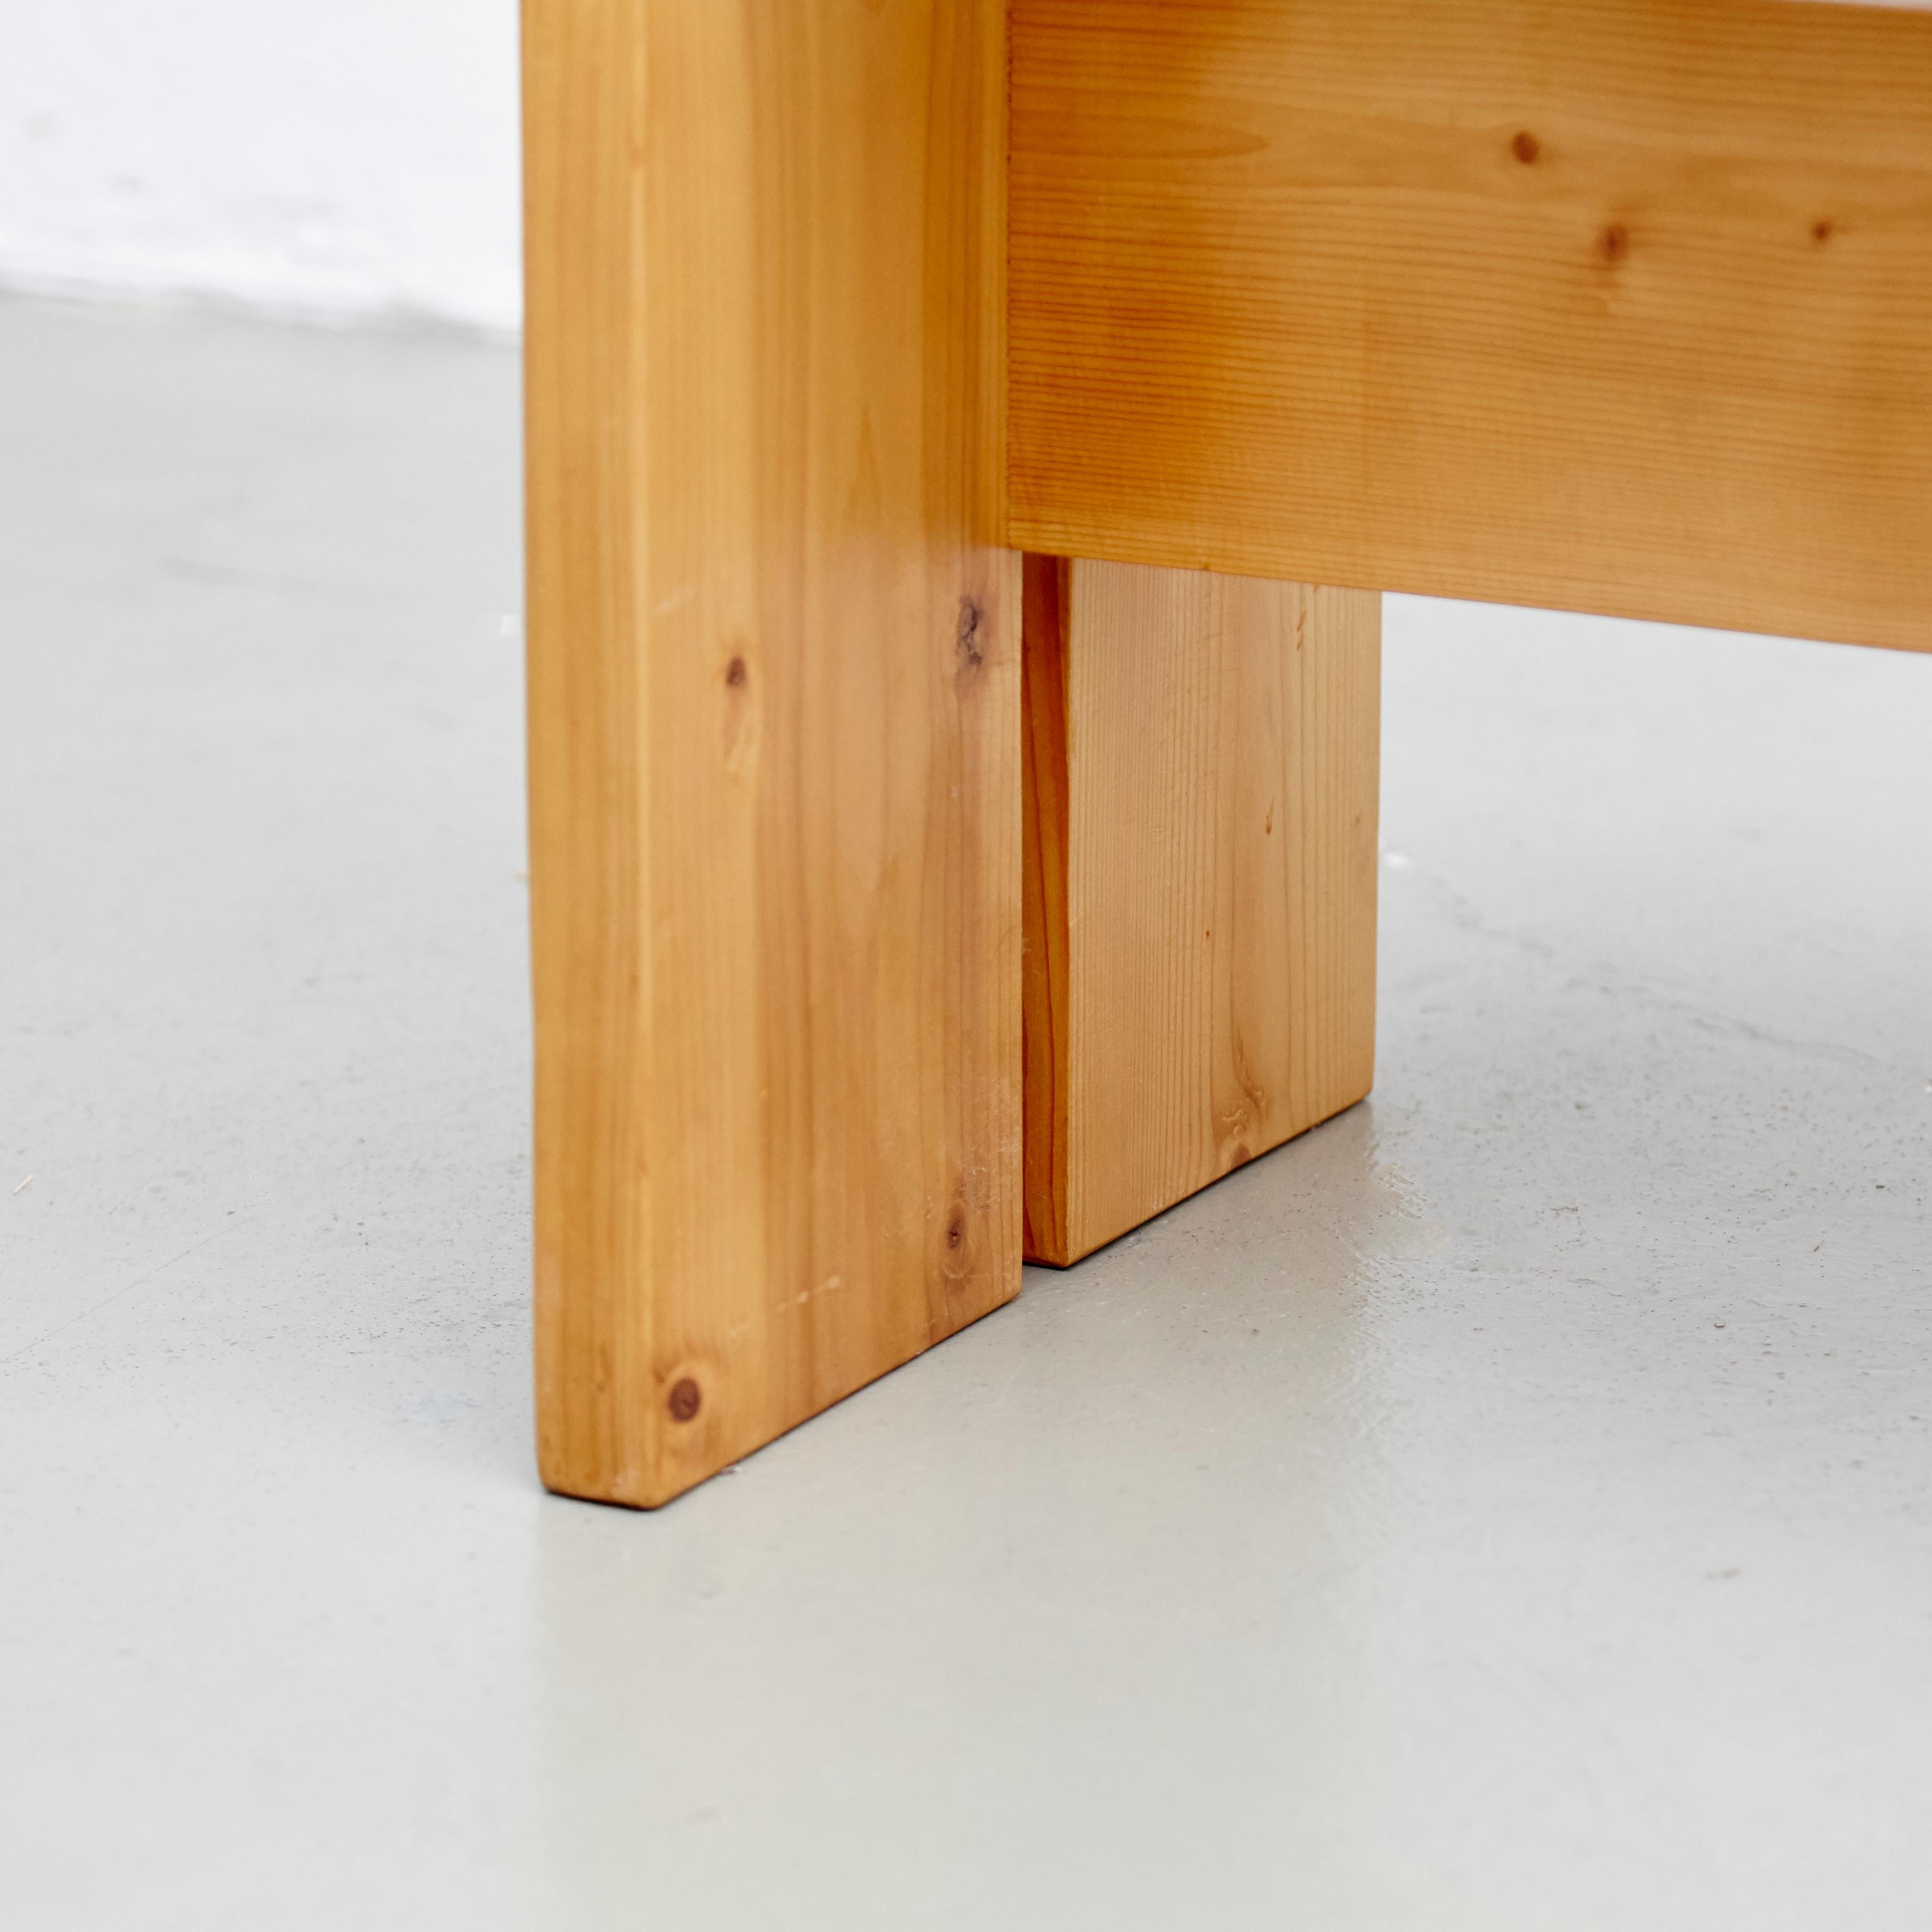 Charlotte Perriand Pine Wood Stool for Les Arcs 1